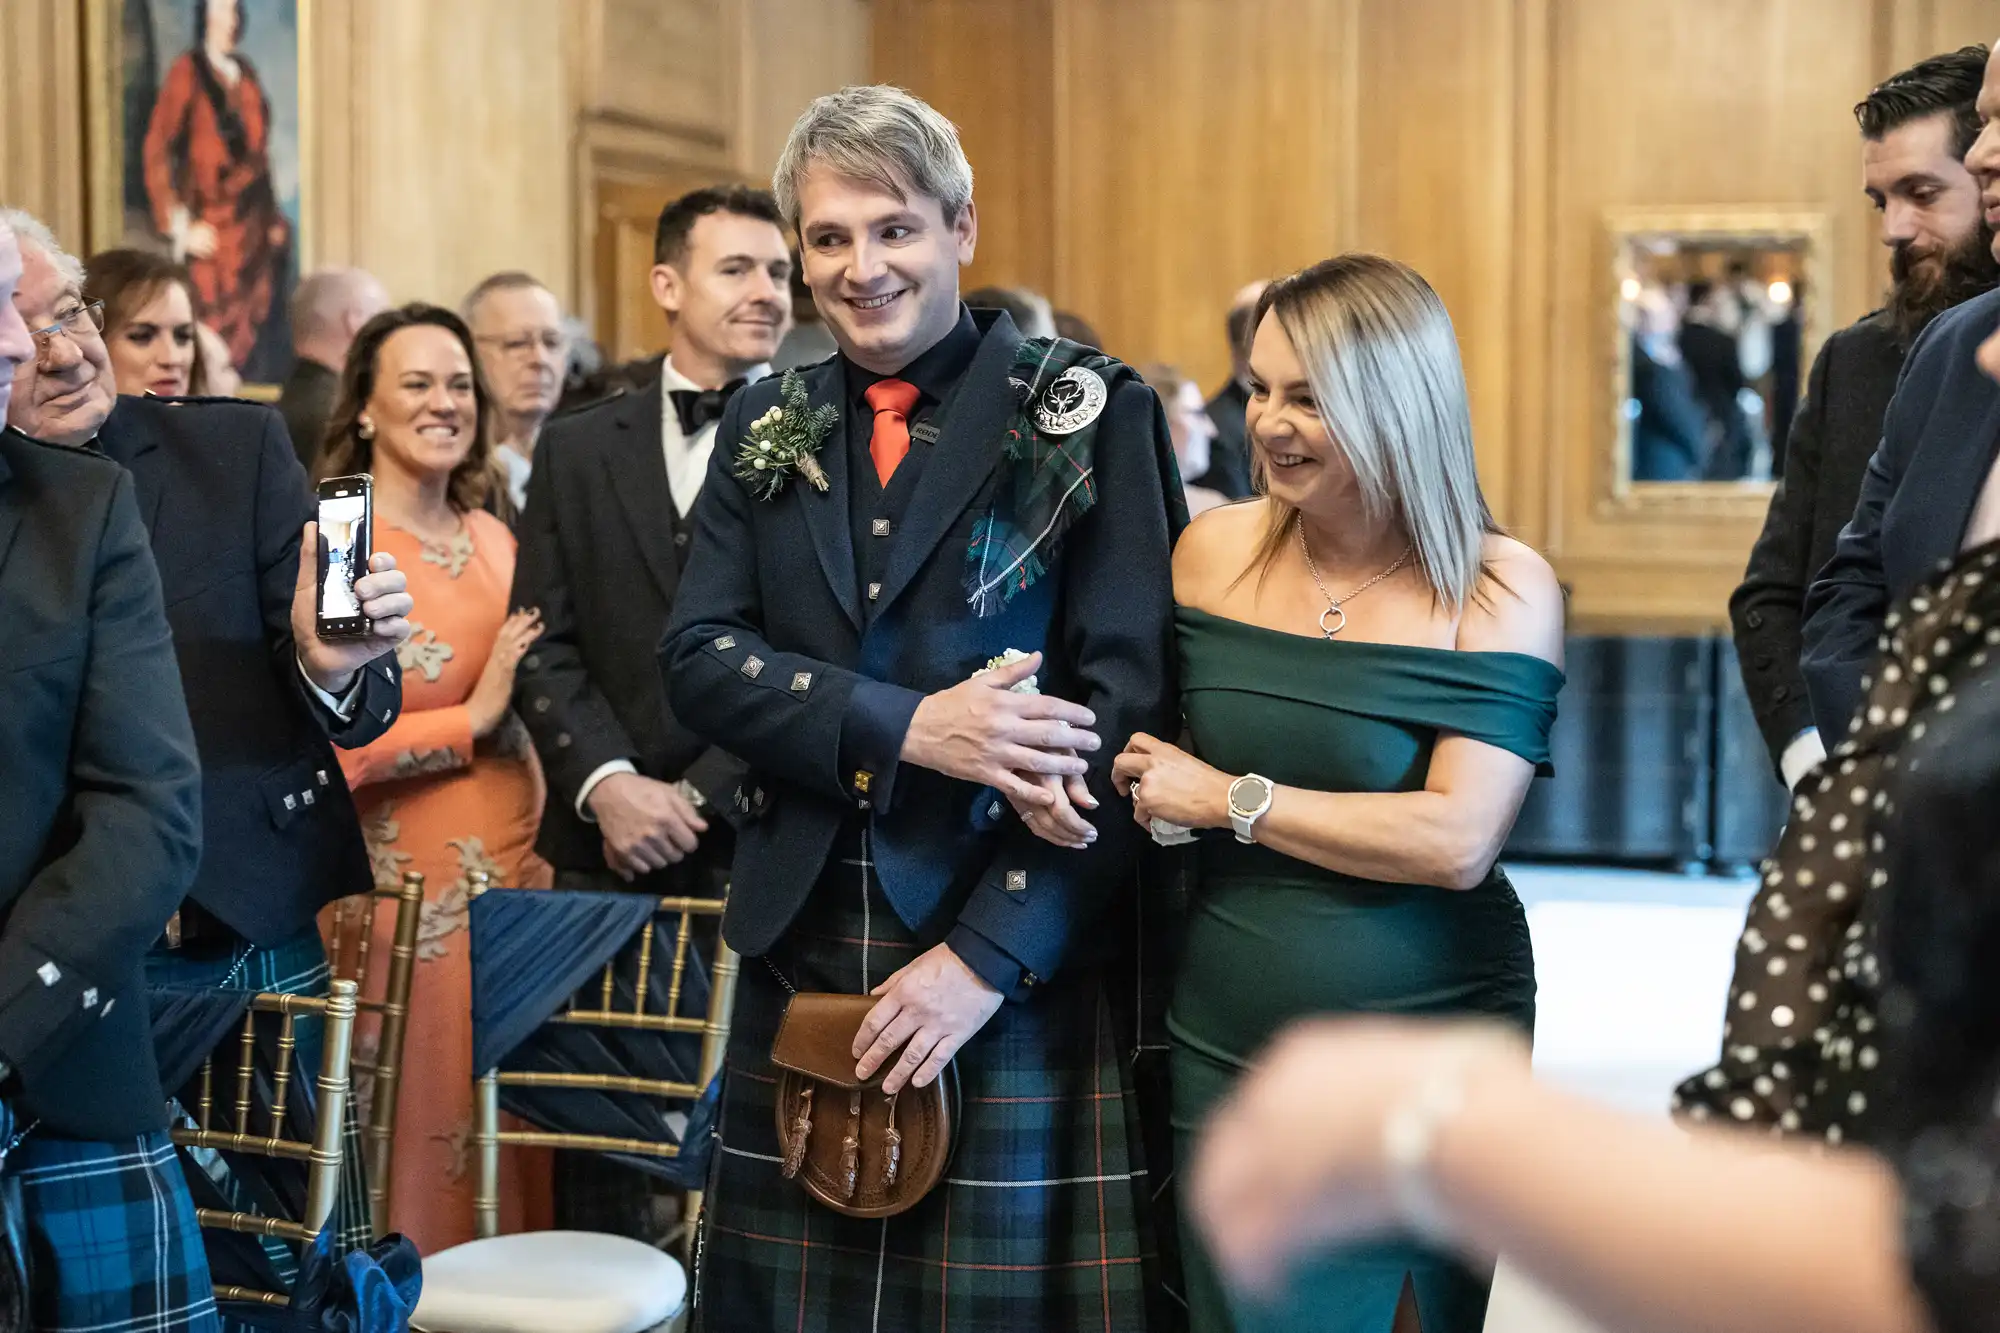 A person in Scottish attire walks down an aisle arm-in-arm with another individual in a green dress, surrounded by smiling onlookers in a formal setting.